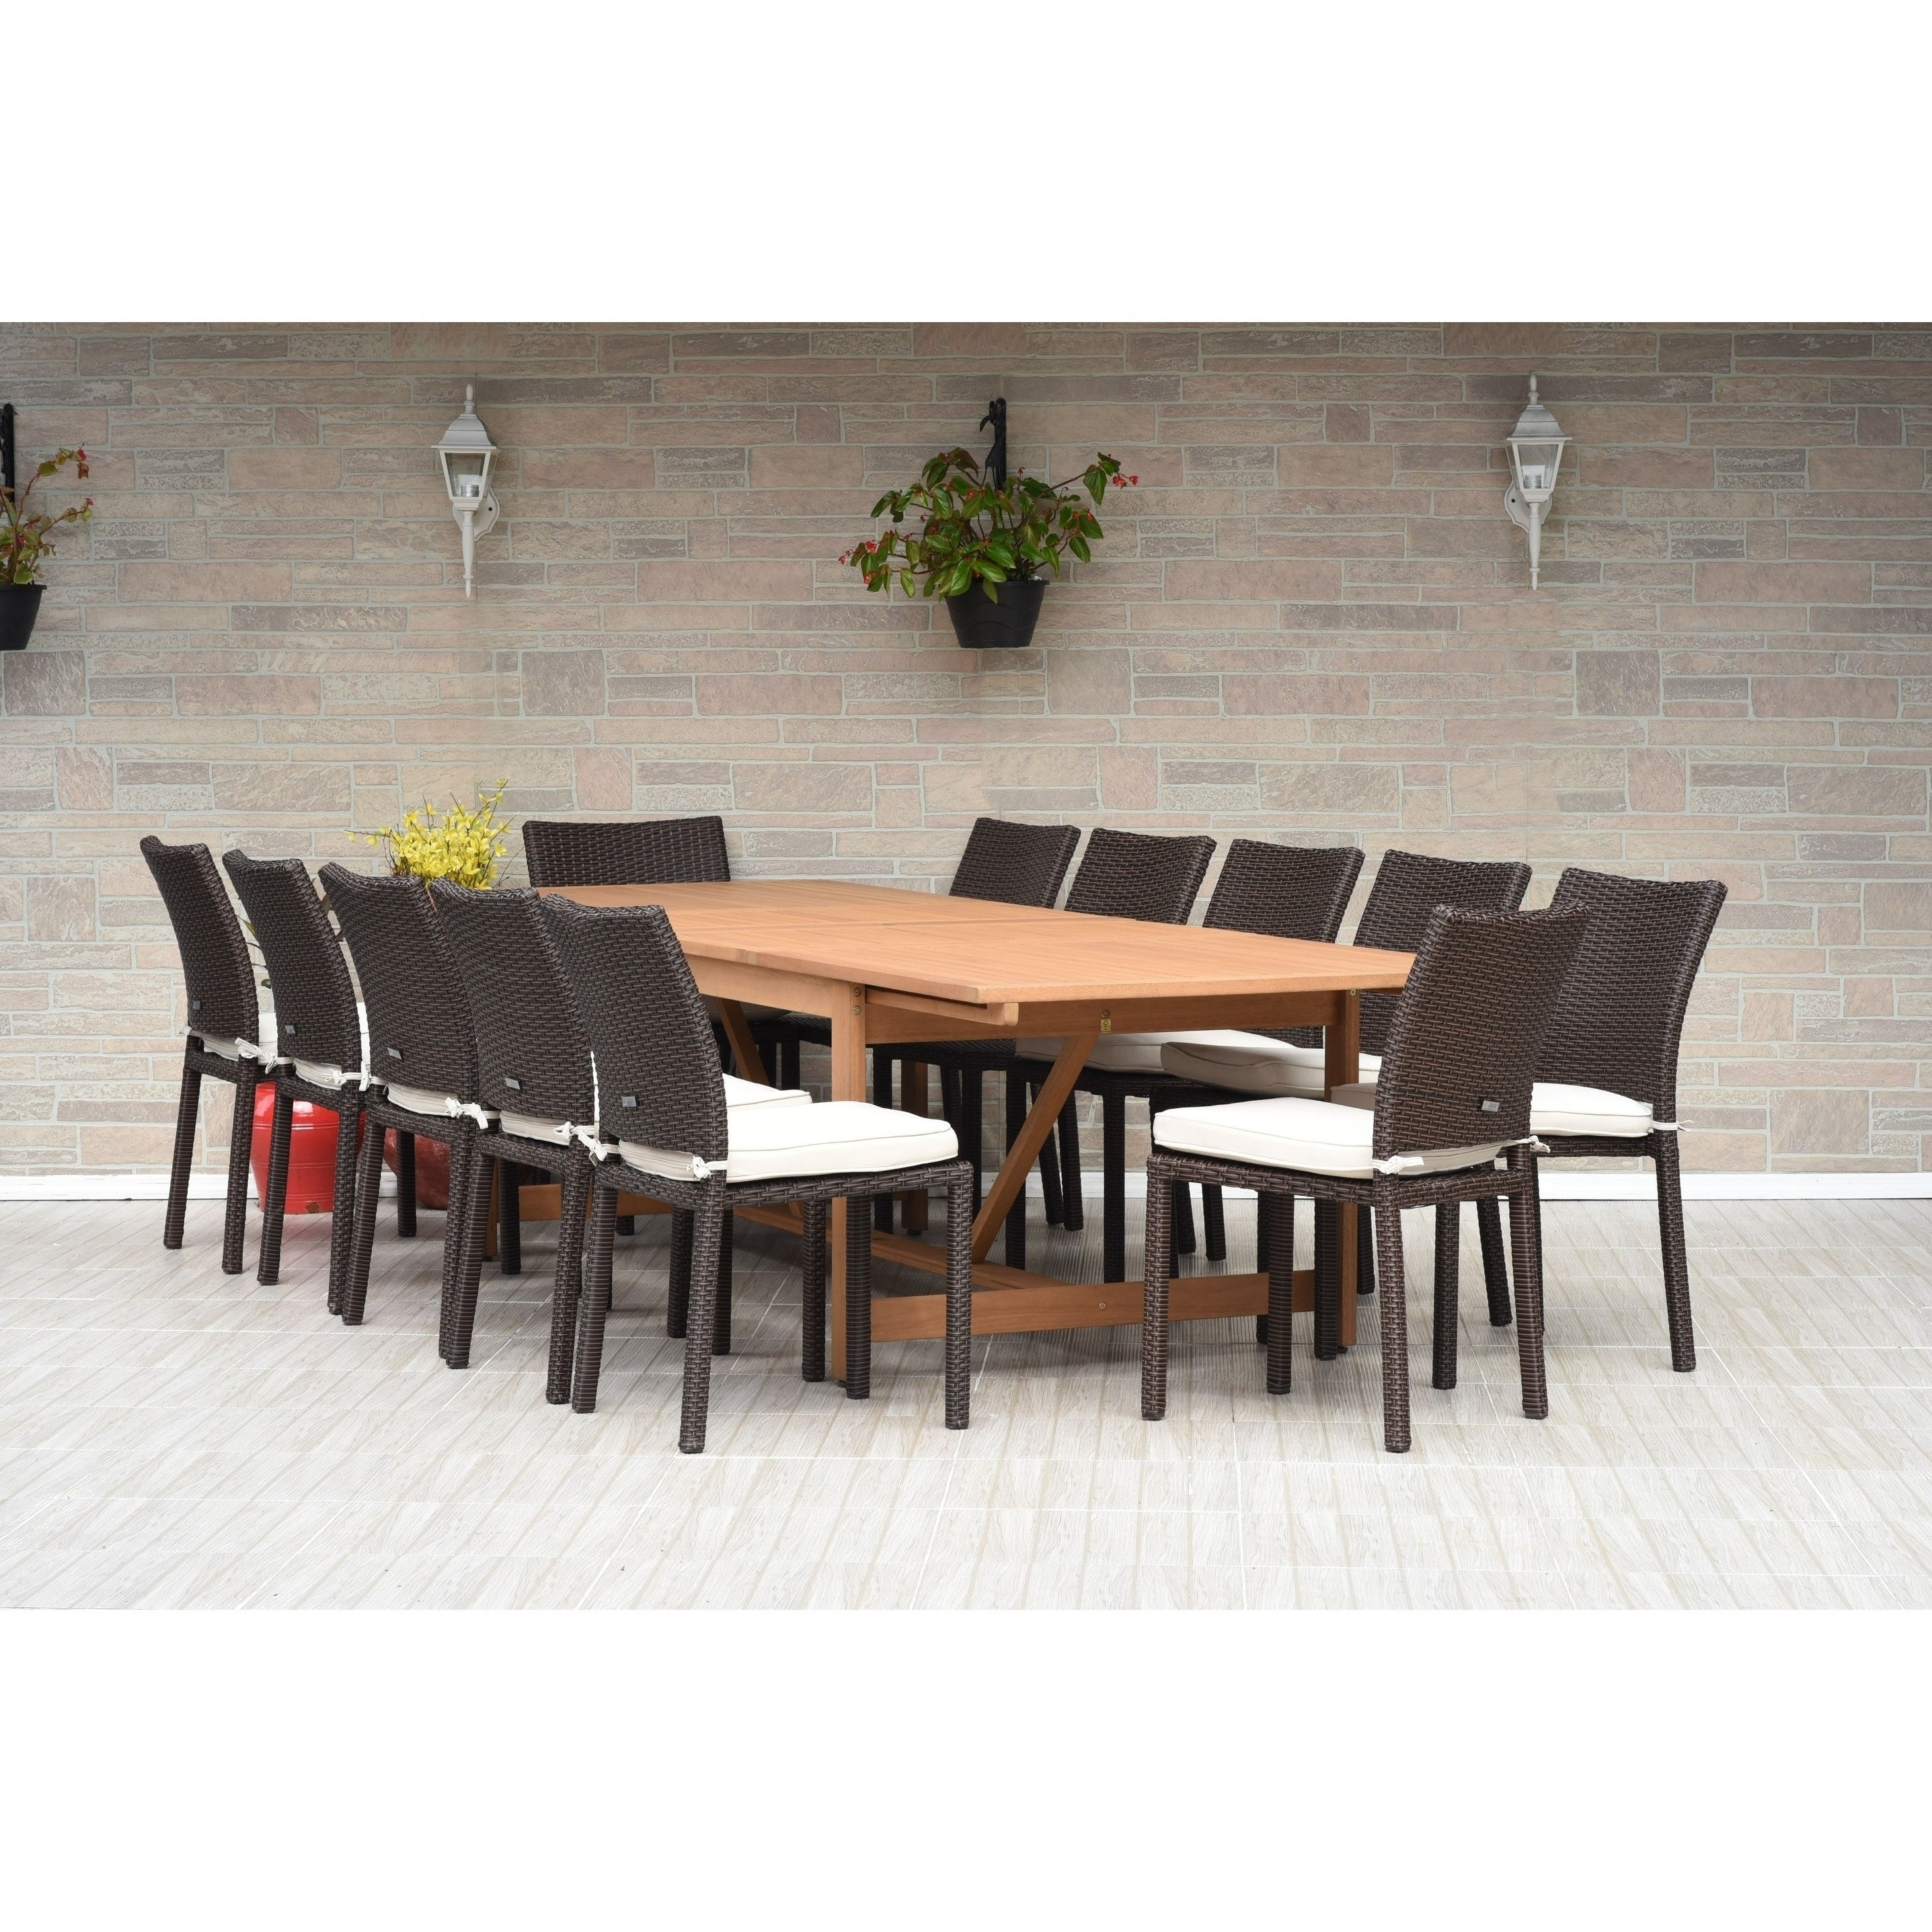 Havenside Home Popham 13 Piece Dining Wood Wicker Double Extendable Set